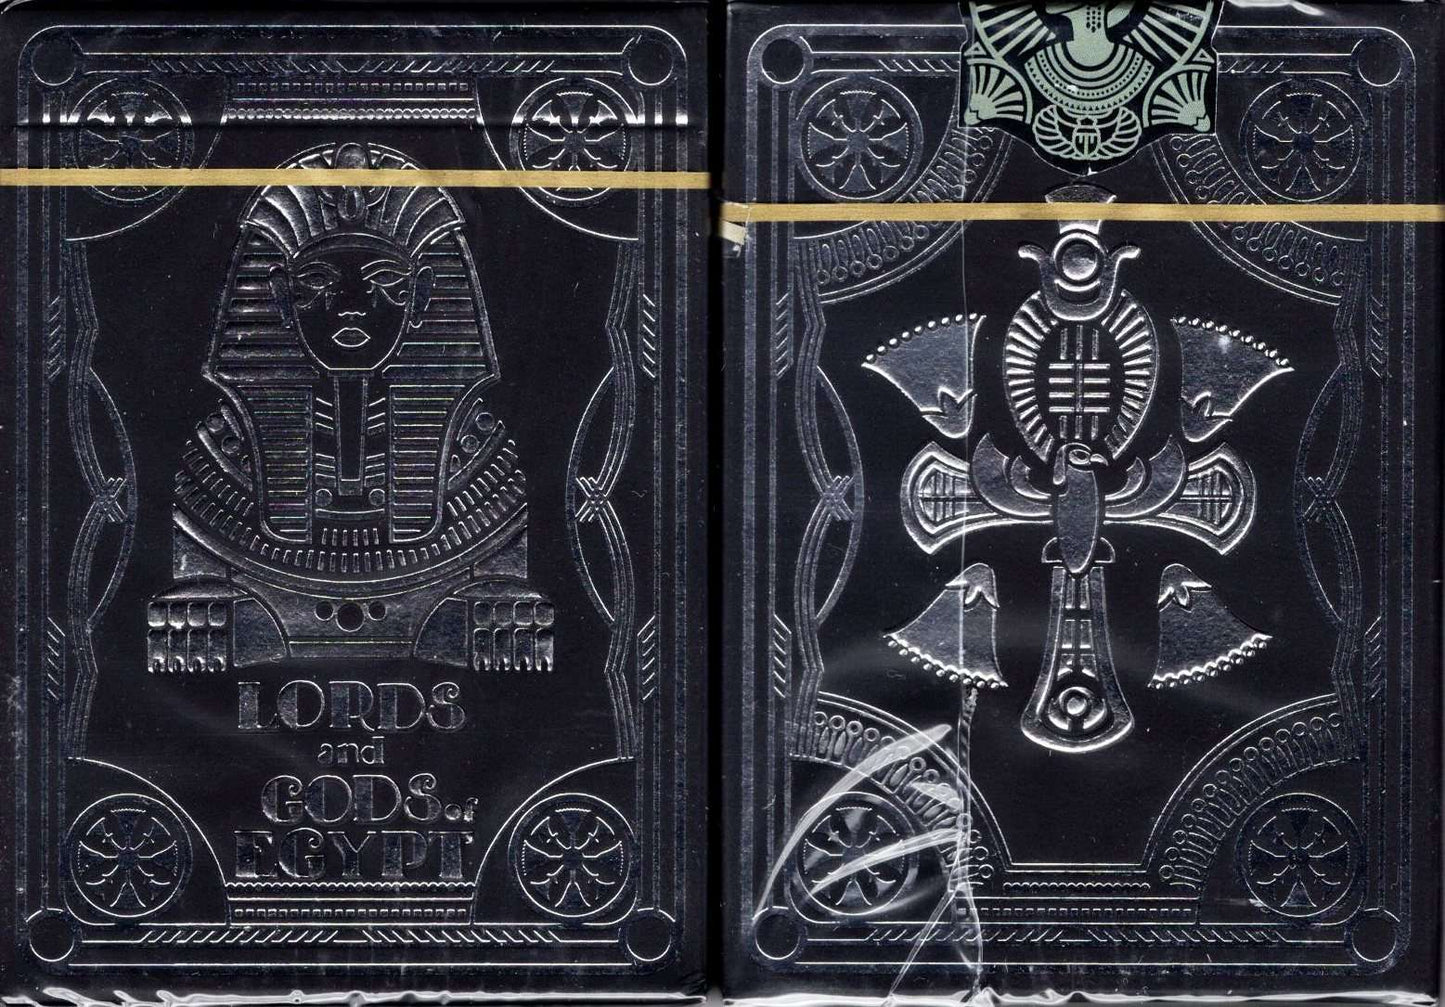 PlayingCardDecks.com-Egypt Playing Cards SPCC: Lords & Gods of Egypt